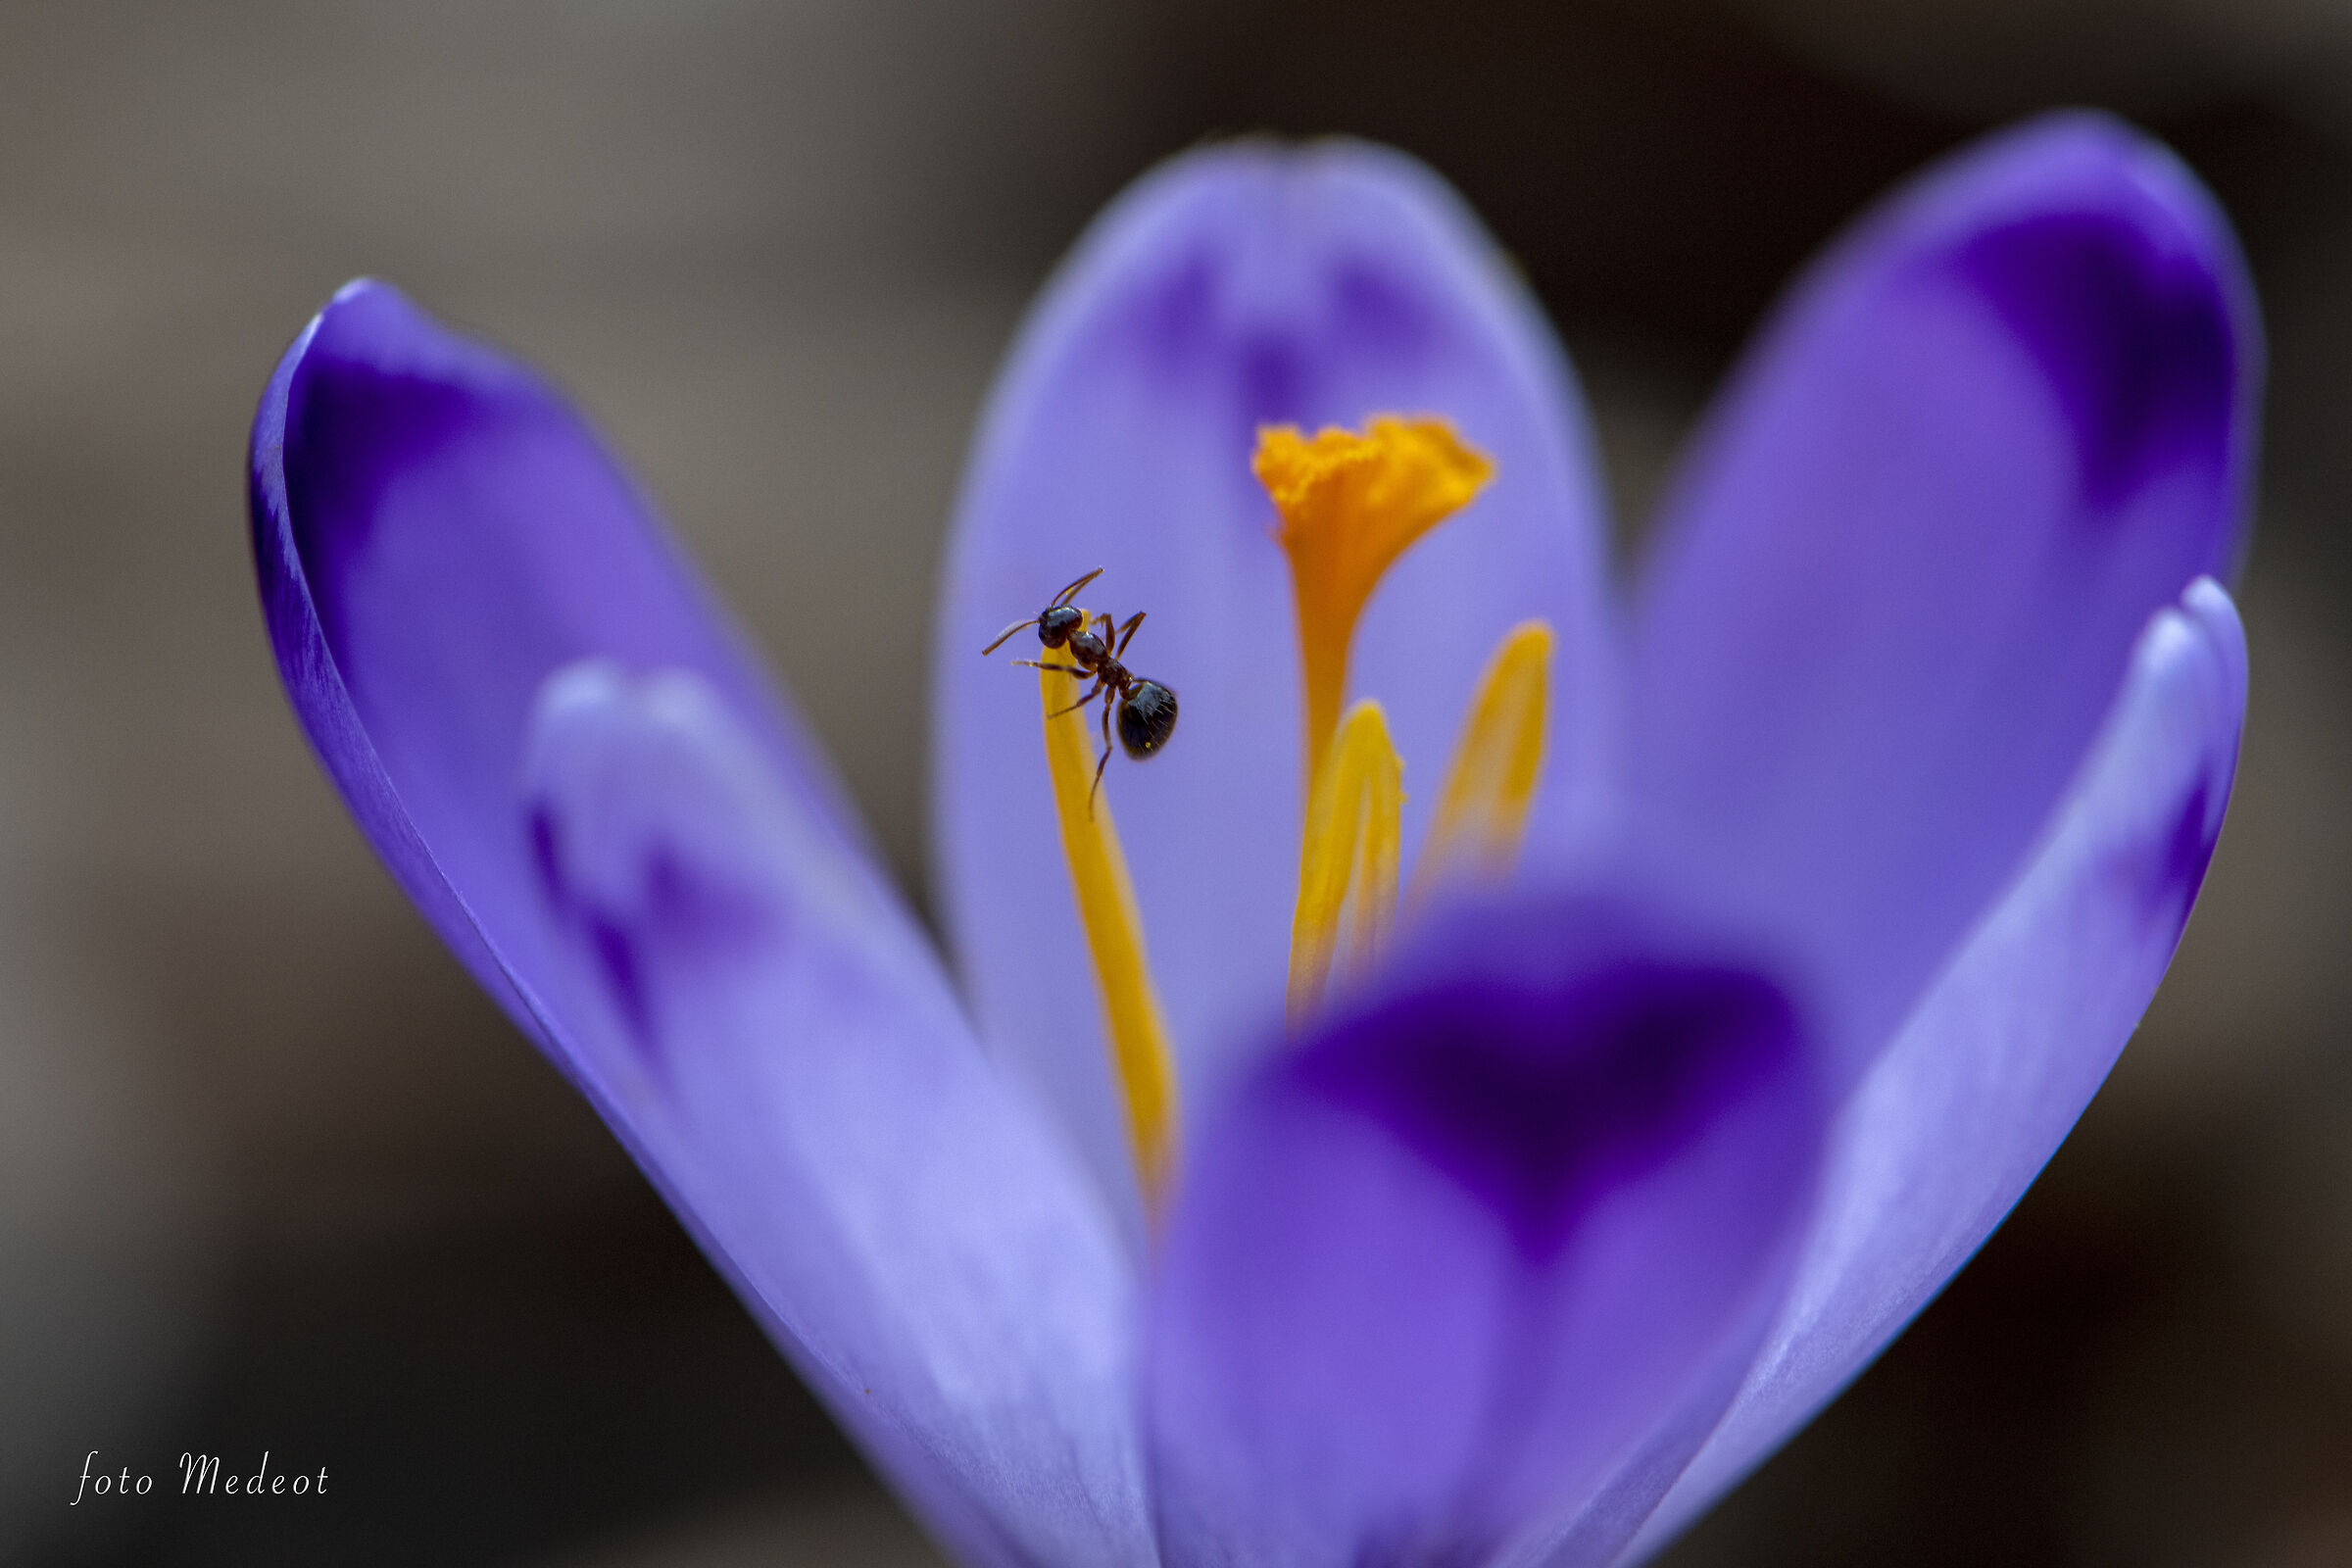 The ant on the Crocus...